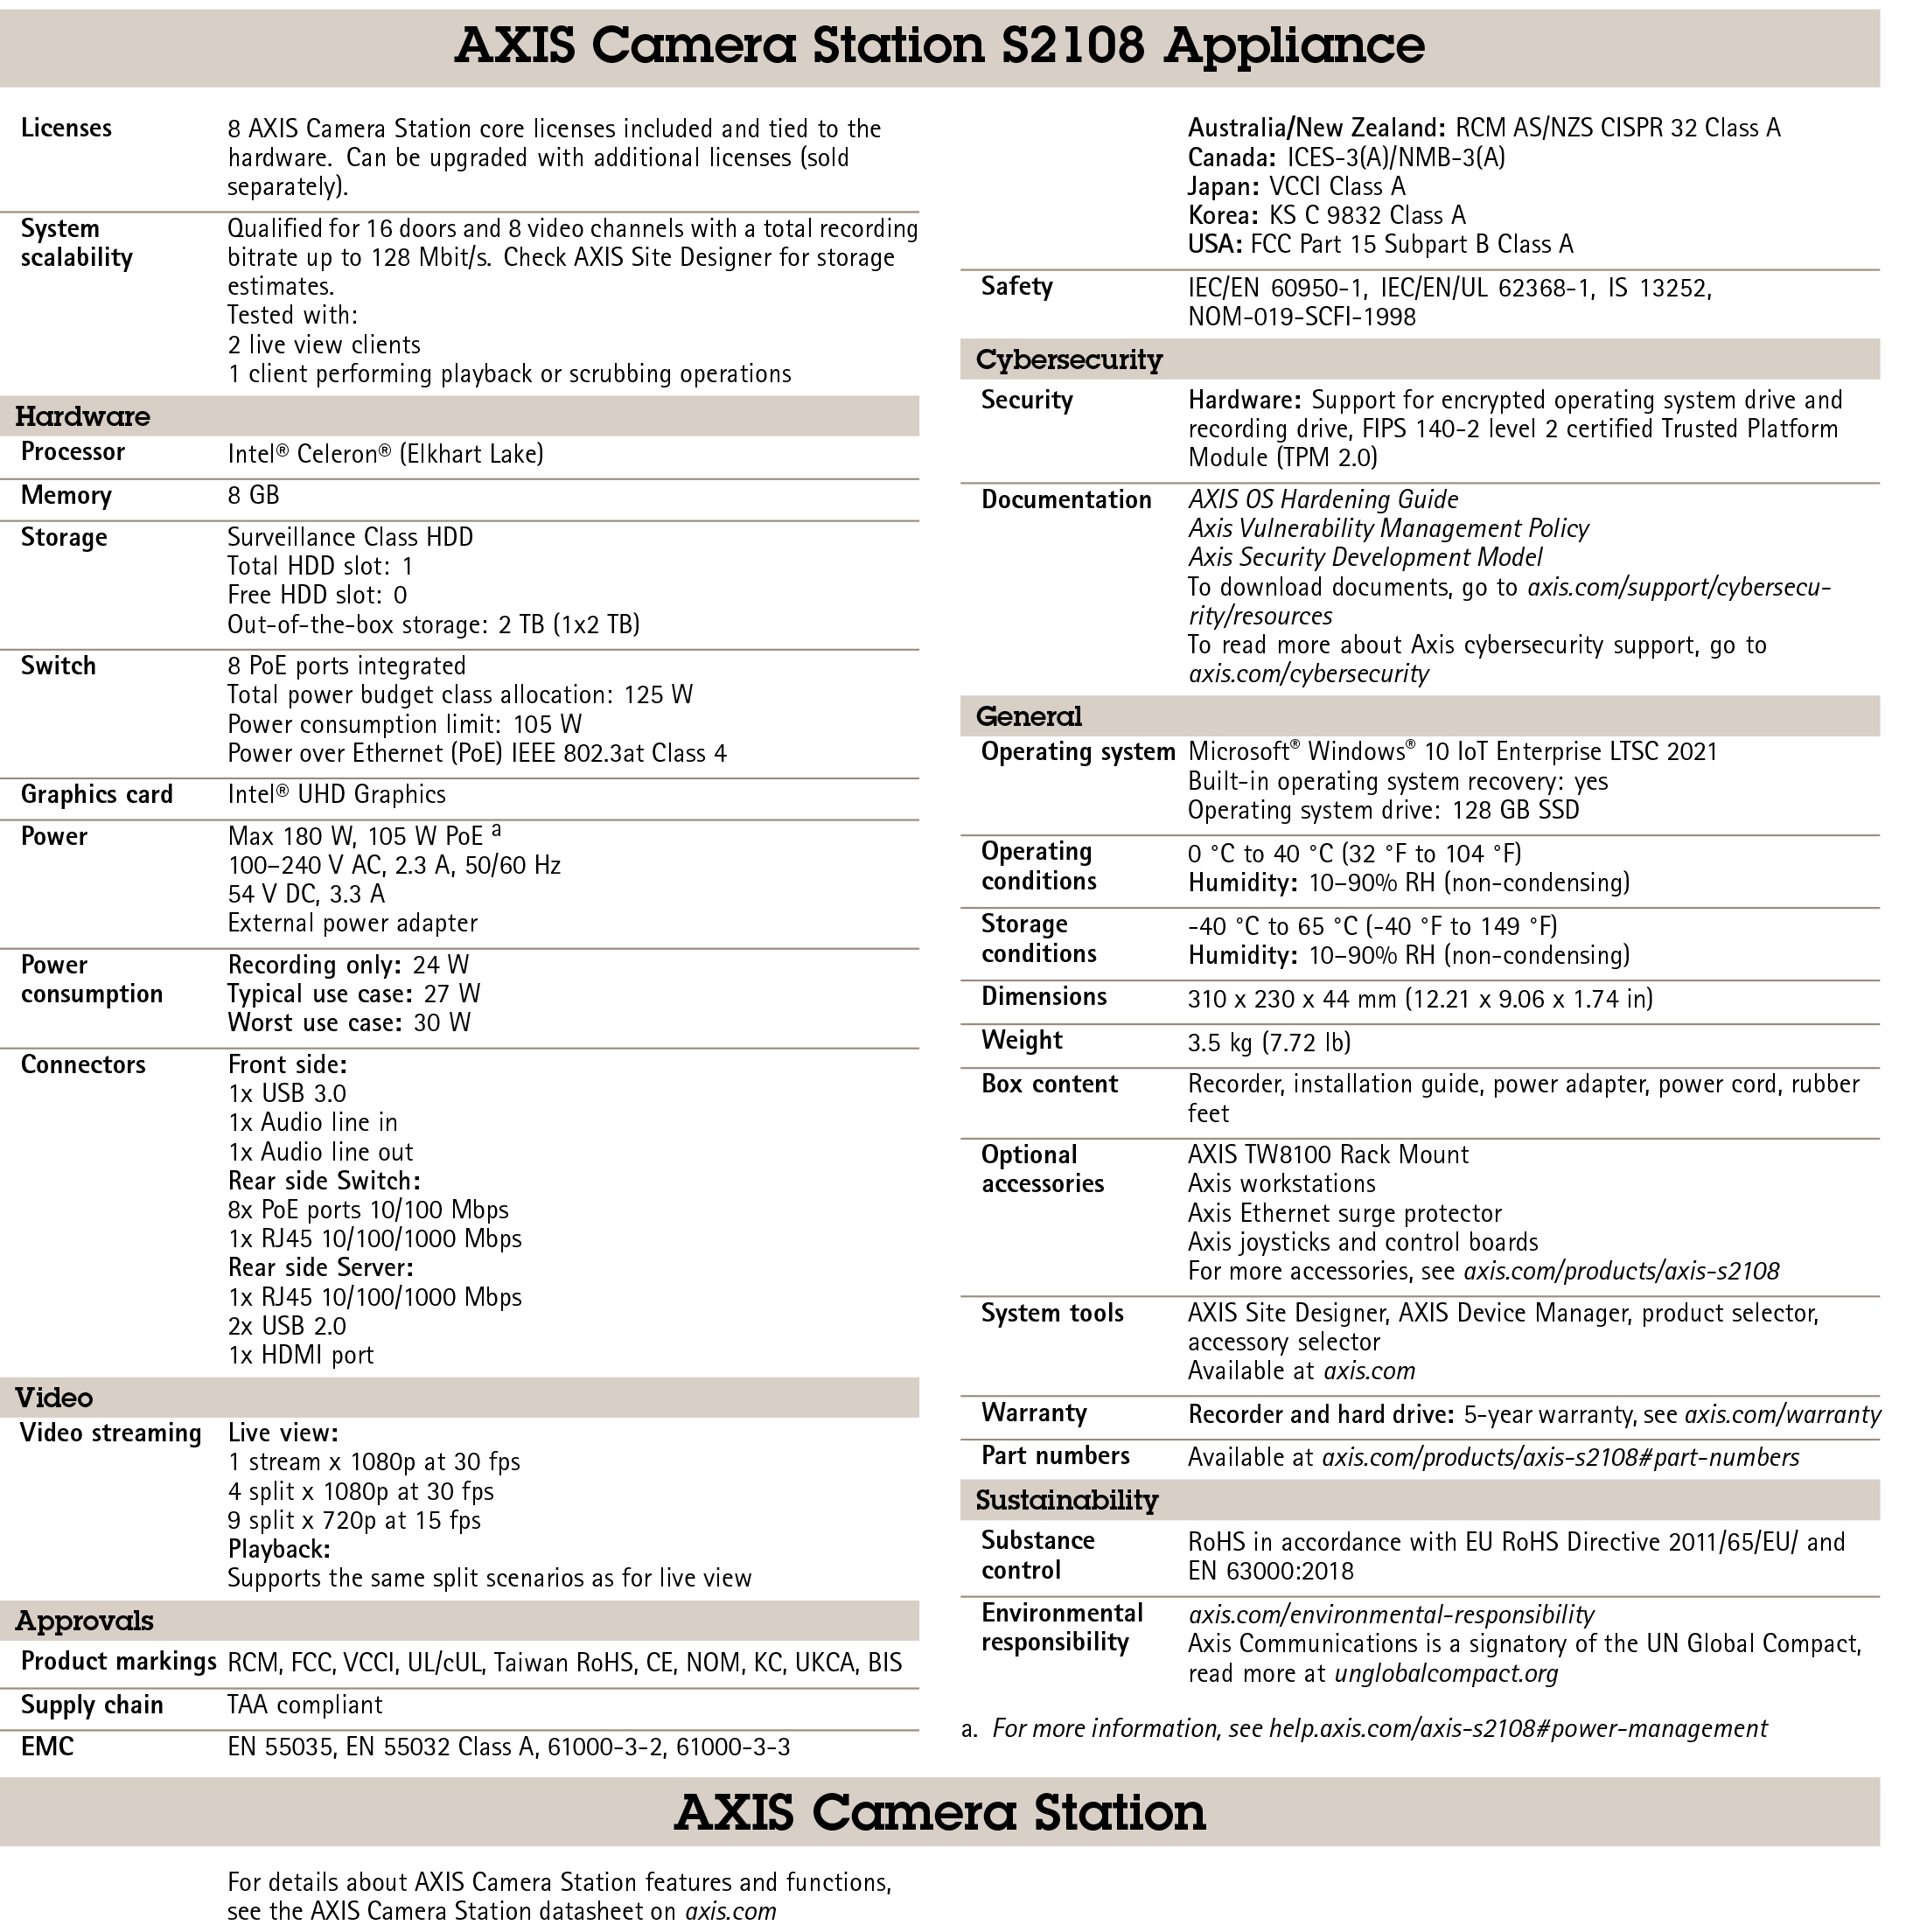 AXIS Camera Station S2108 Appliance